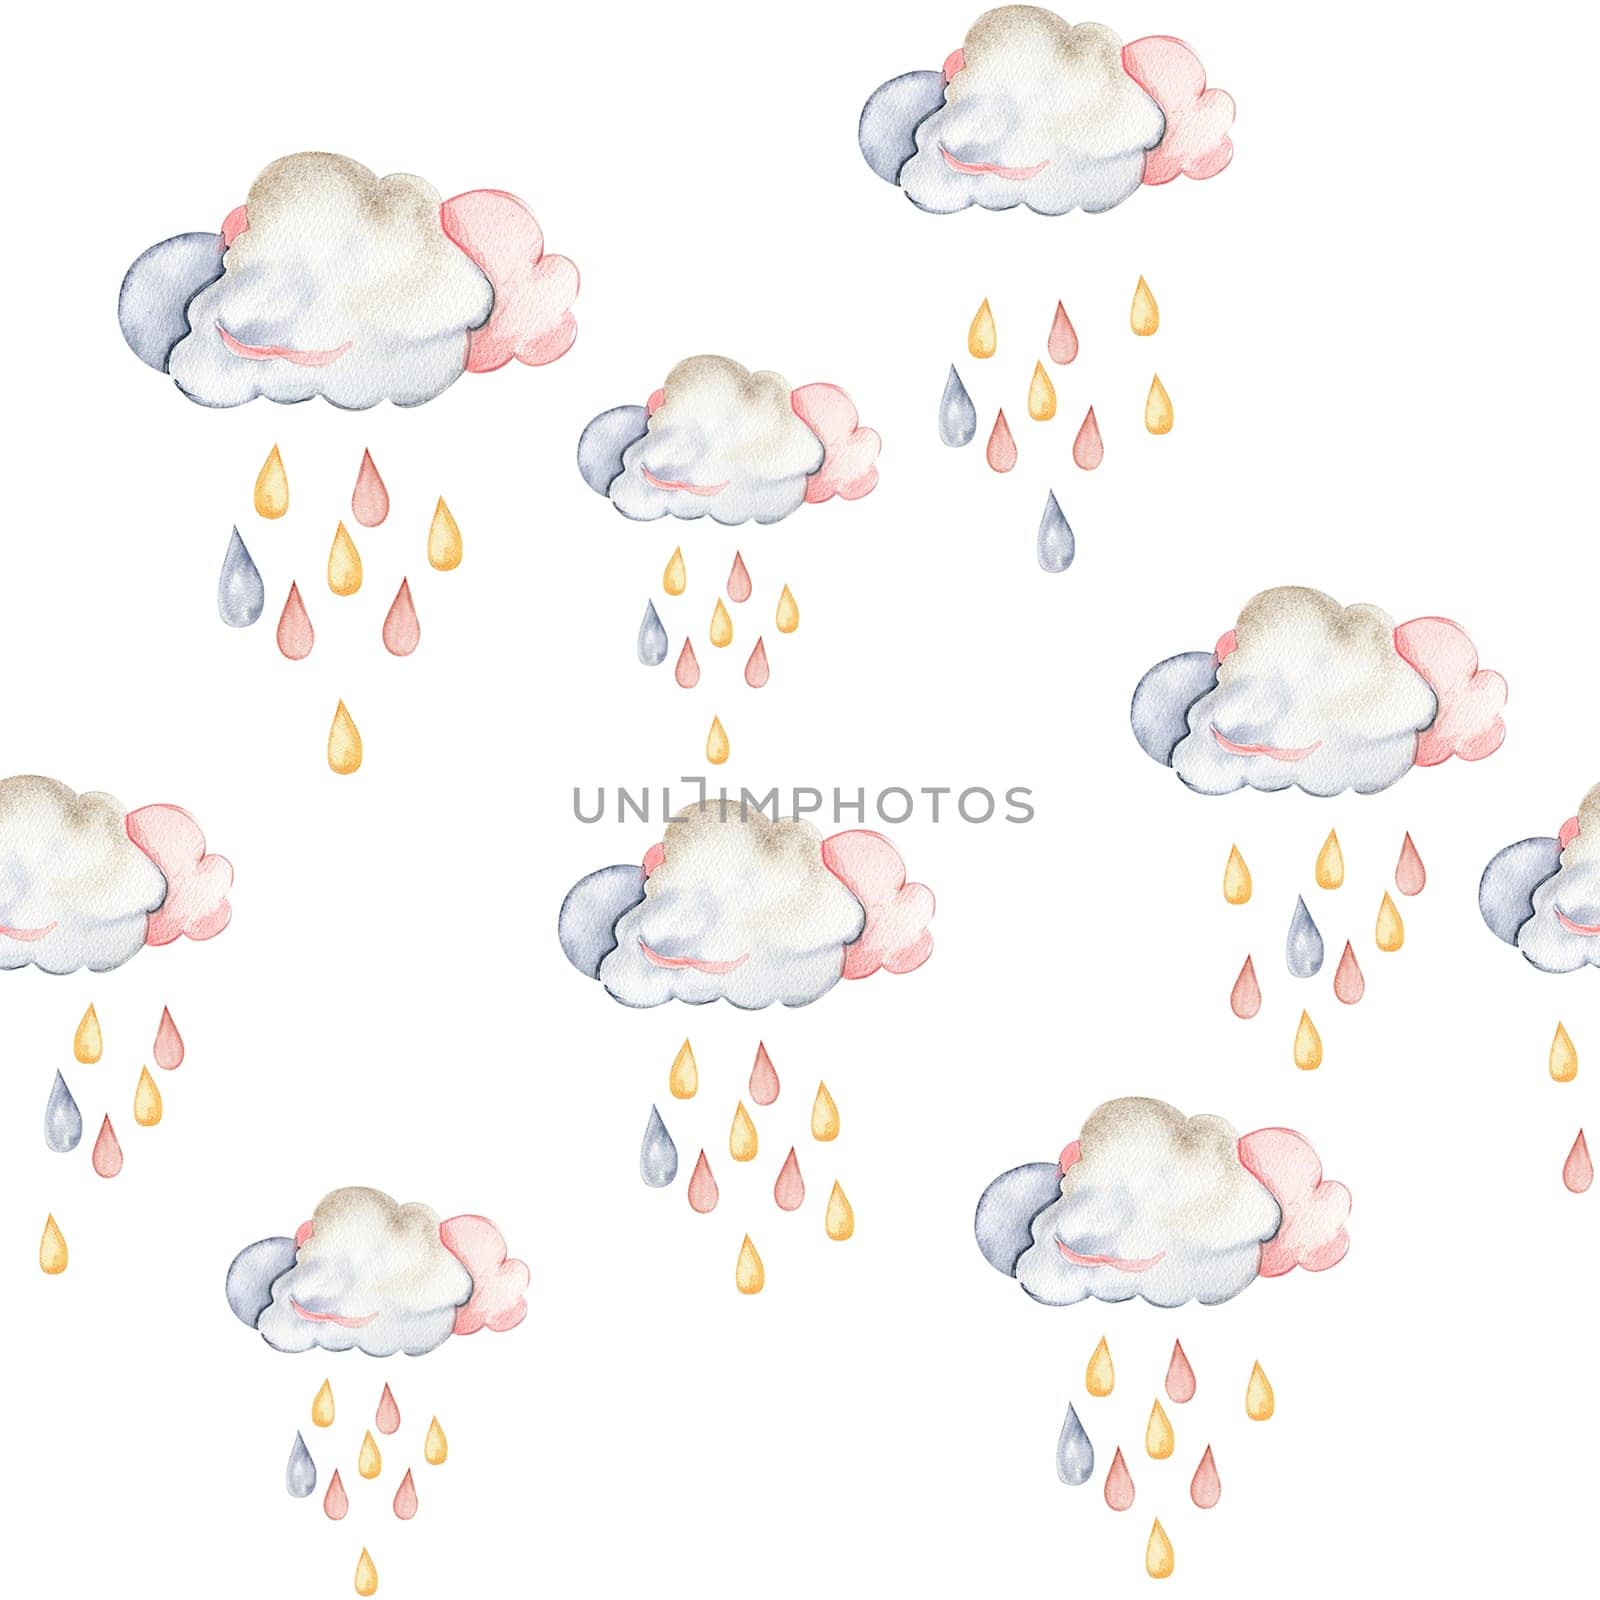 Watercolor hand painted clowds and drops seamless pattern. Illustration isolated on white background. Design for fabric, baby shower party, birthday, cake, holiday design, greetings card, invitation.